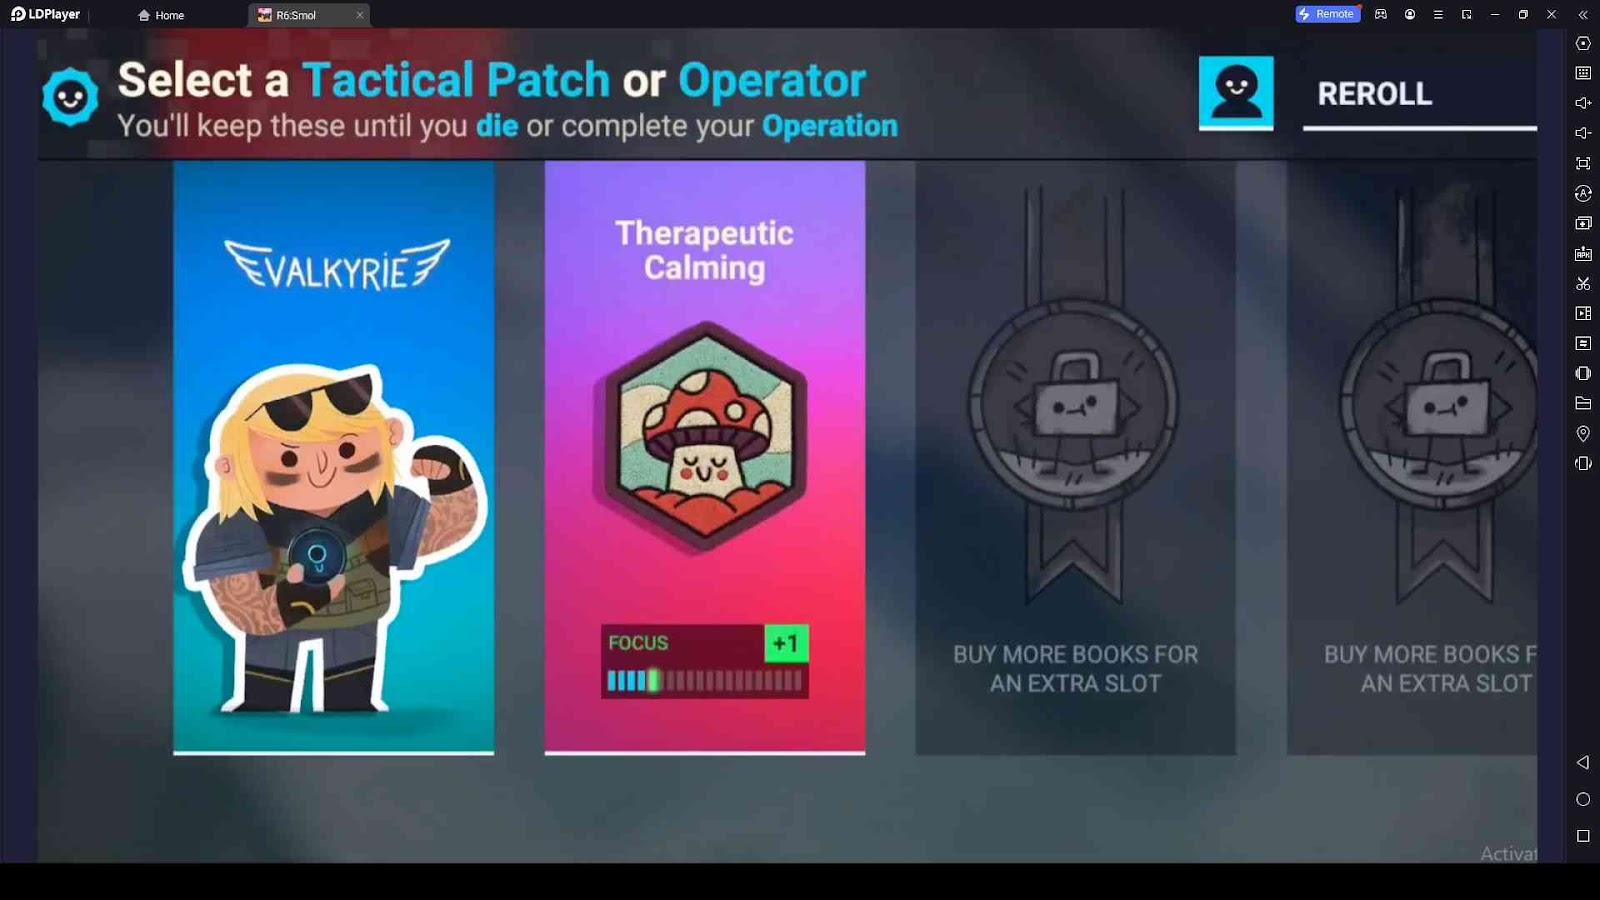 Select a Tactical Patch or Operator